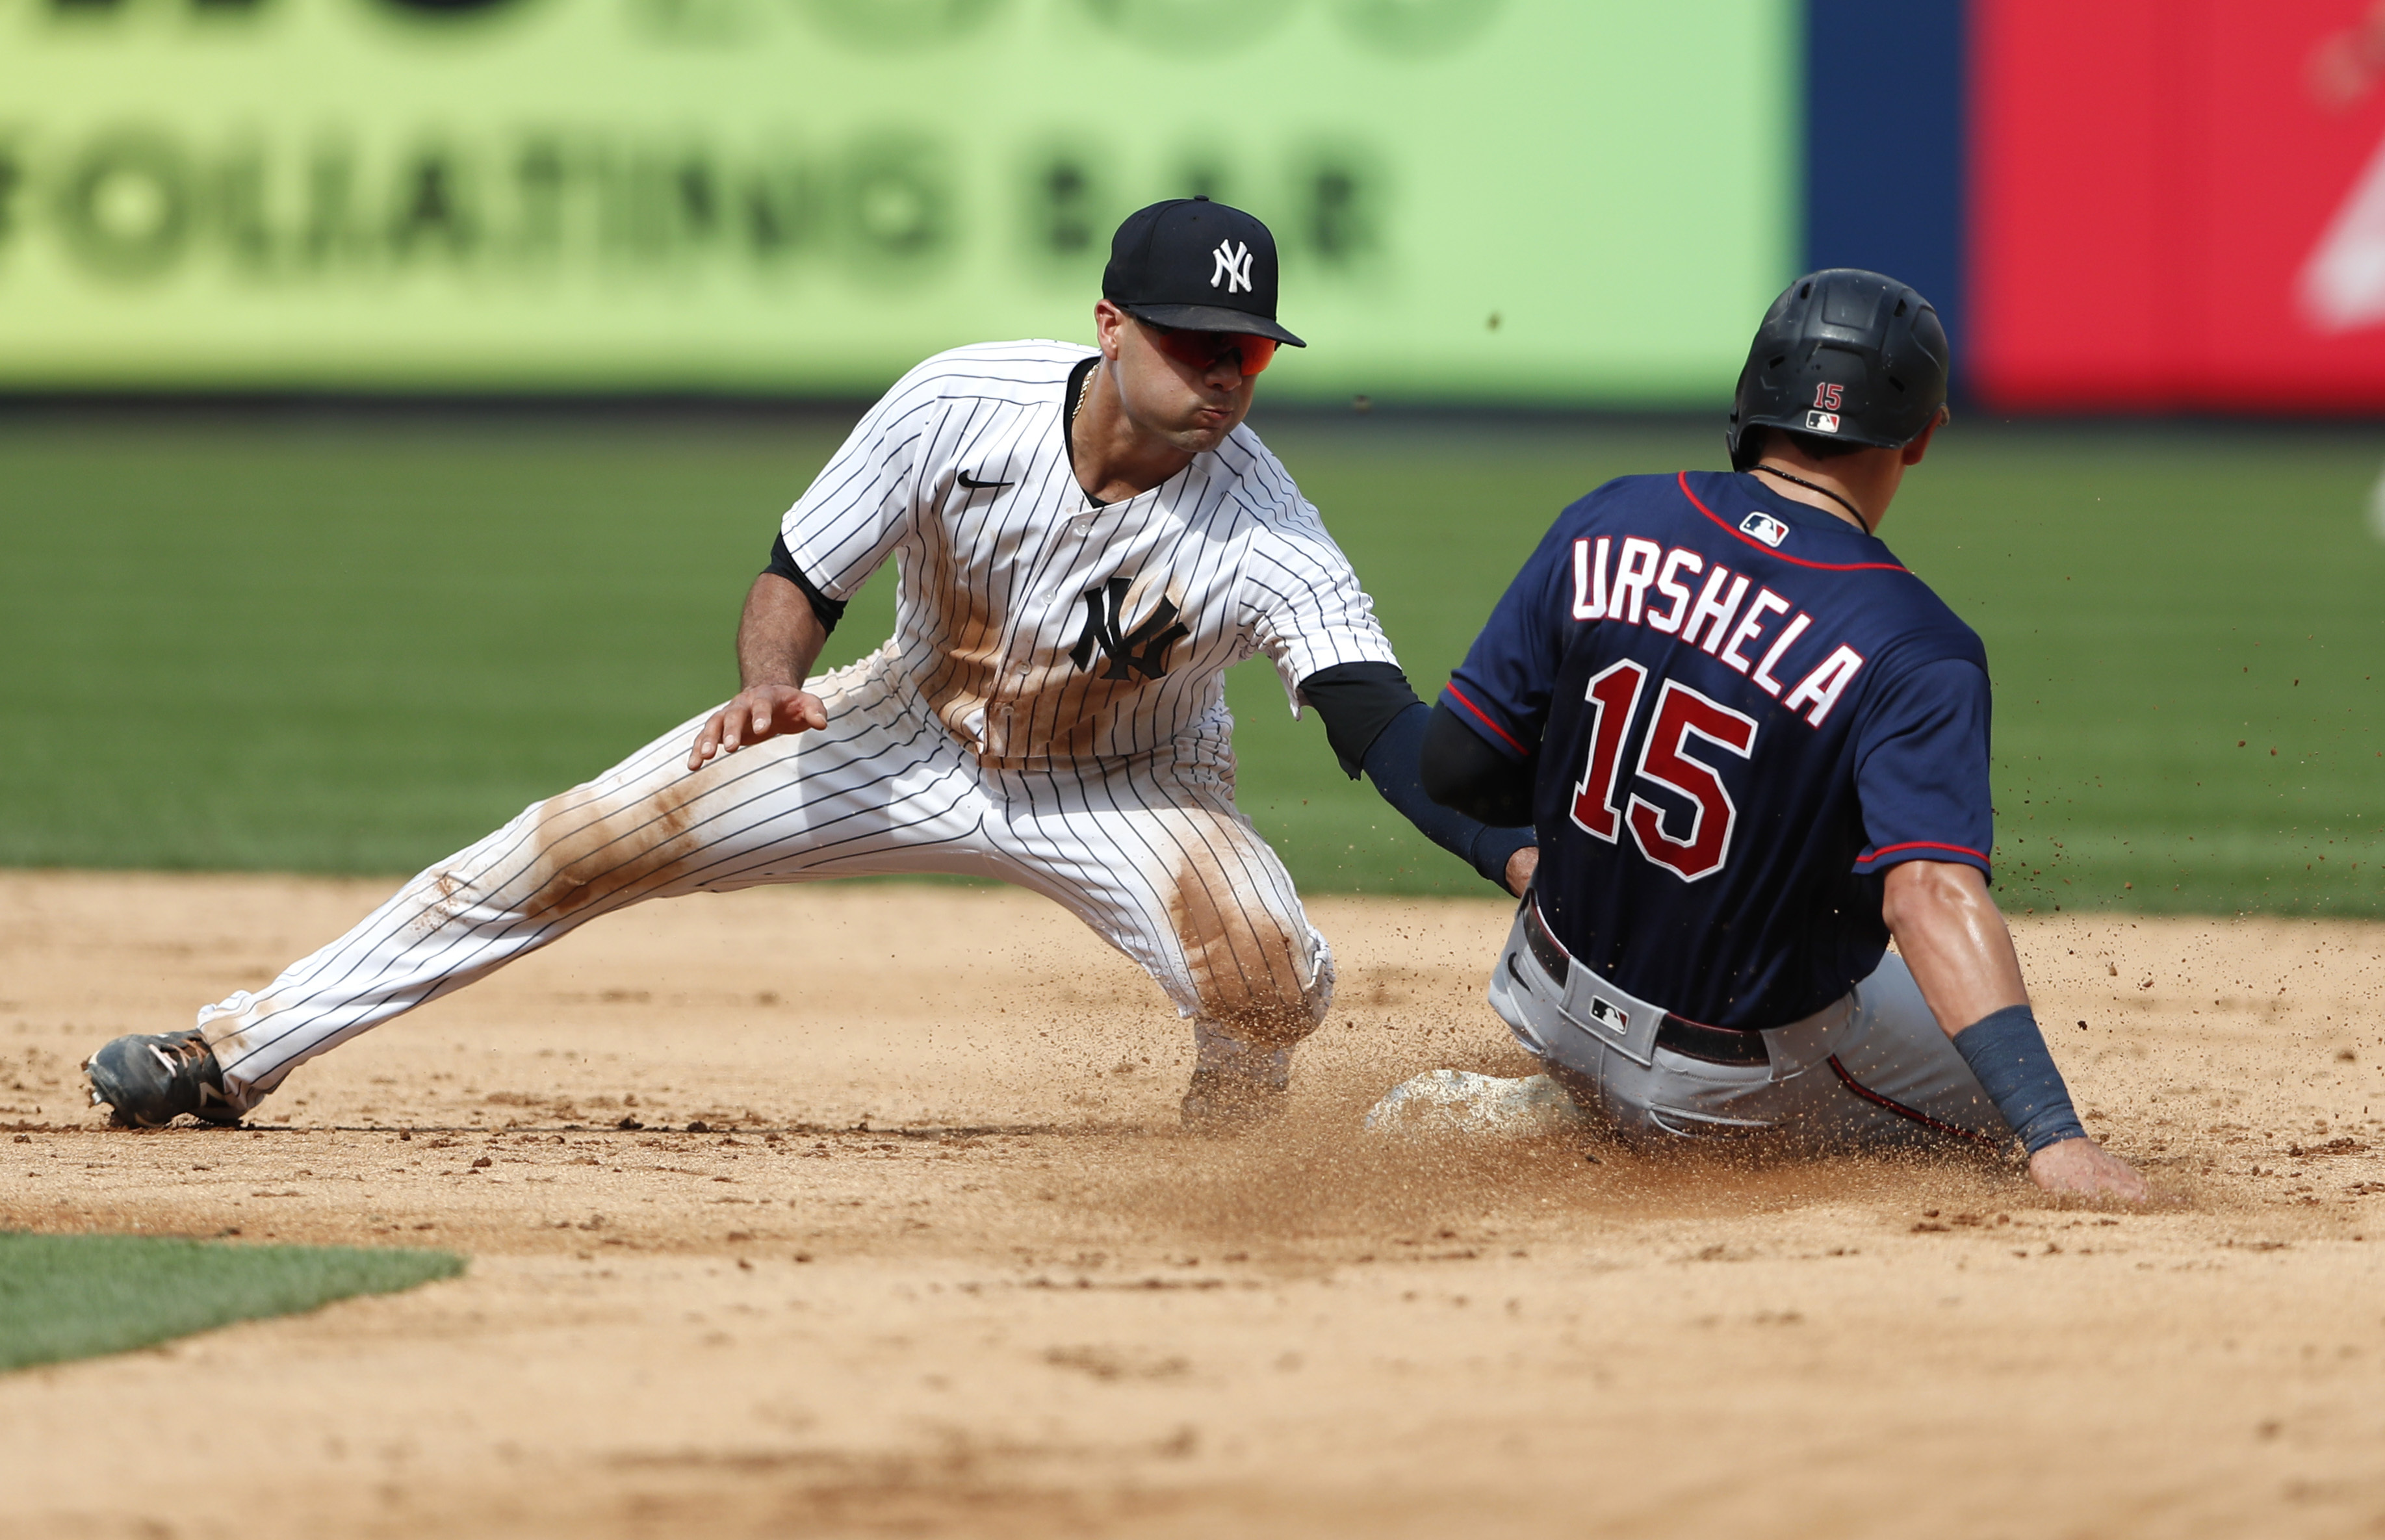 Yankees vs. Indians: How to watch, game thread, TV channel